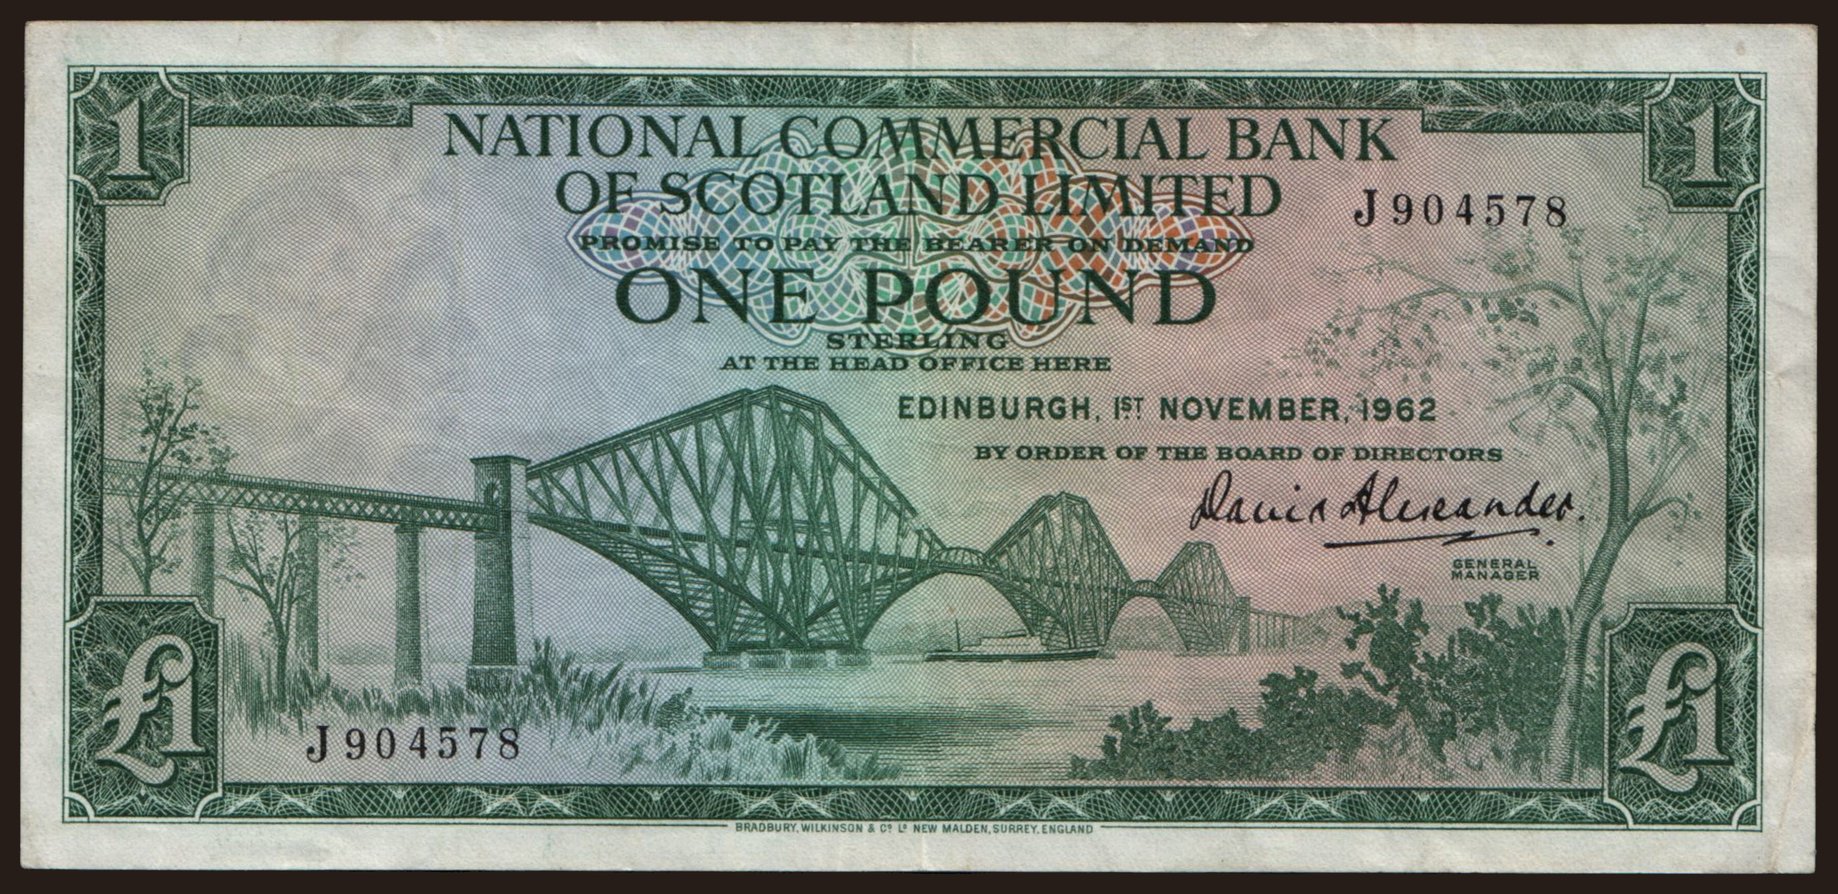 National Commercial Bank of Scotland Limited, 1 Pound, 1962